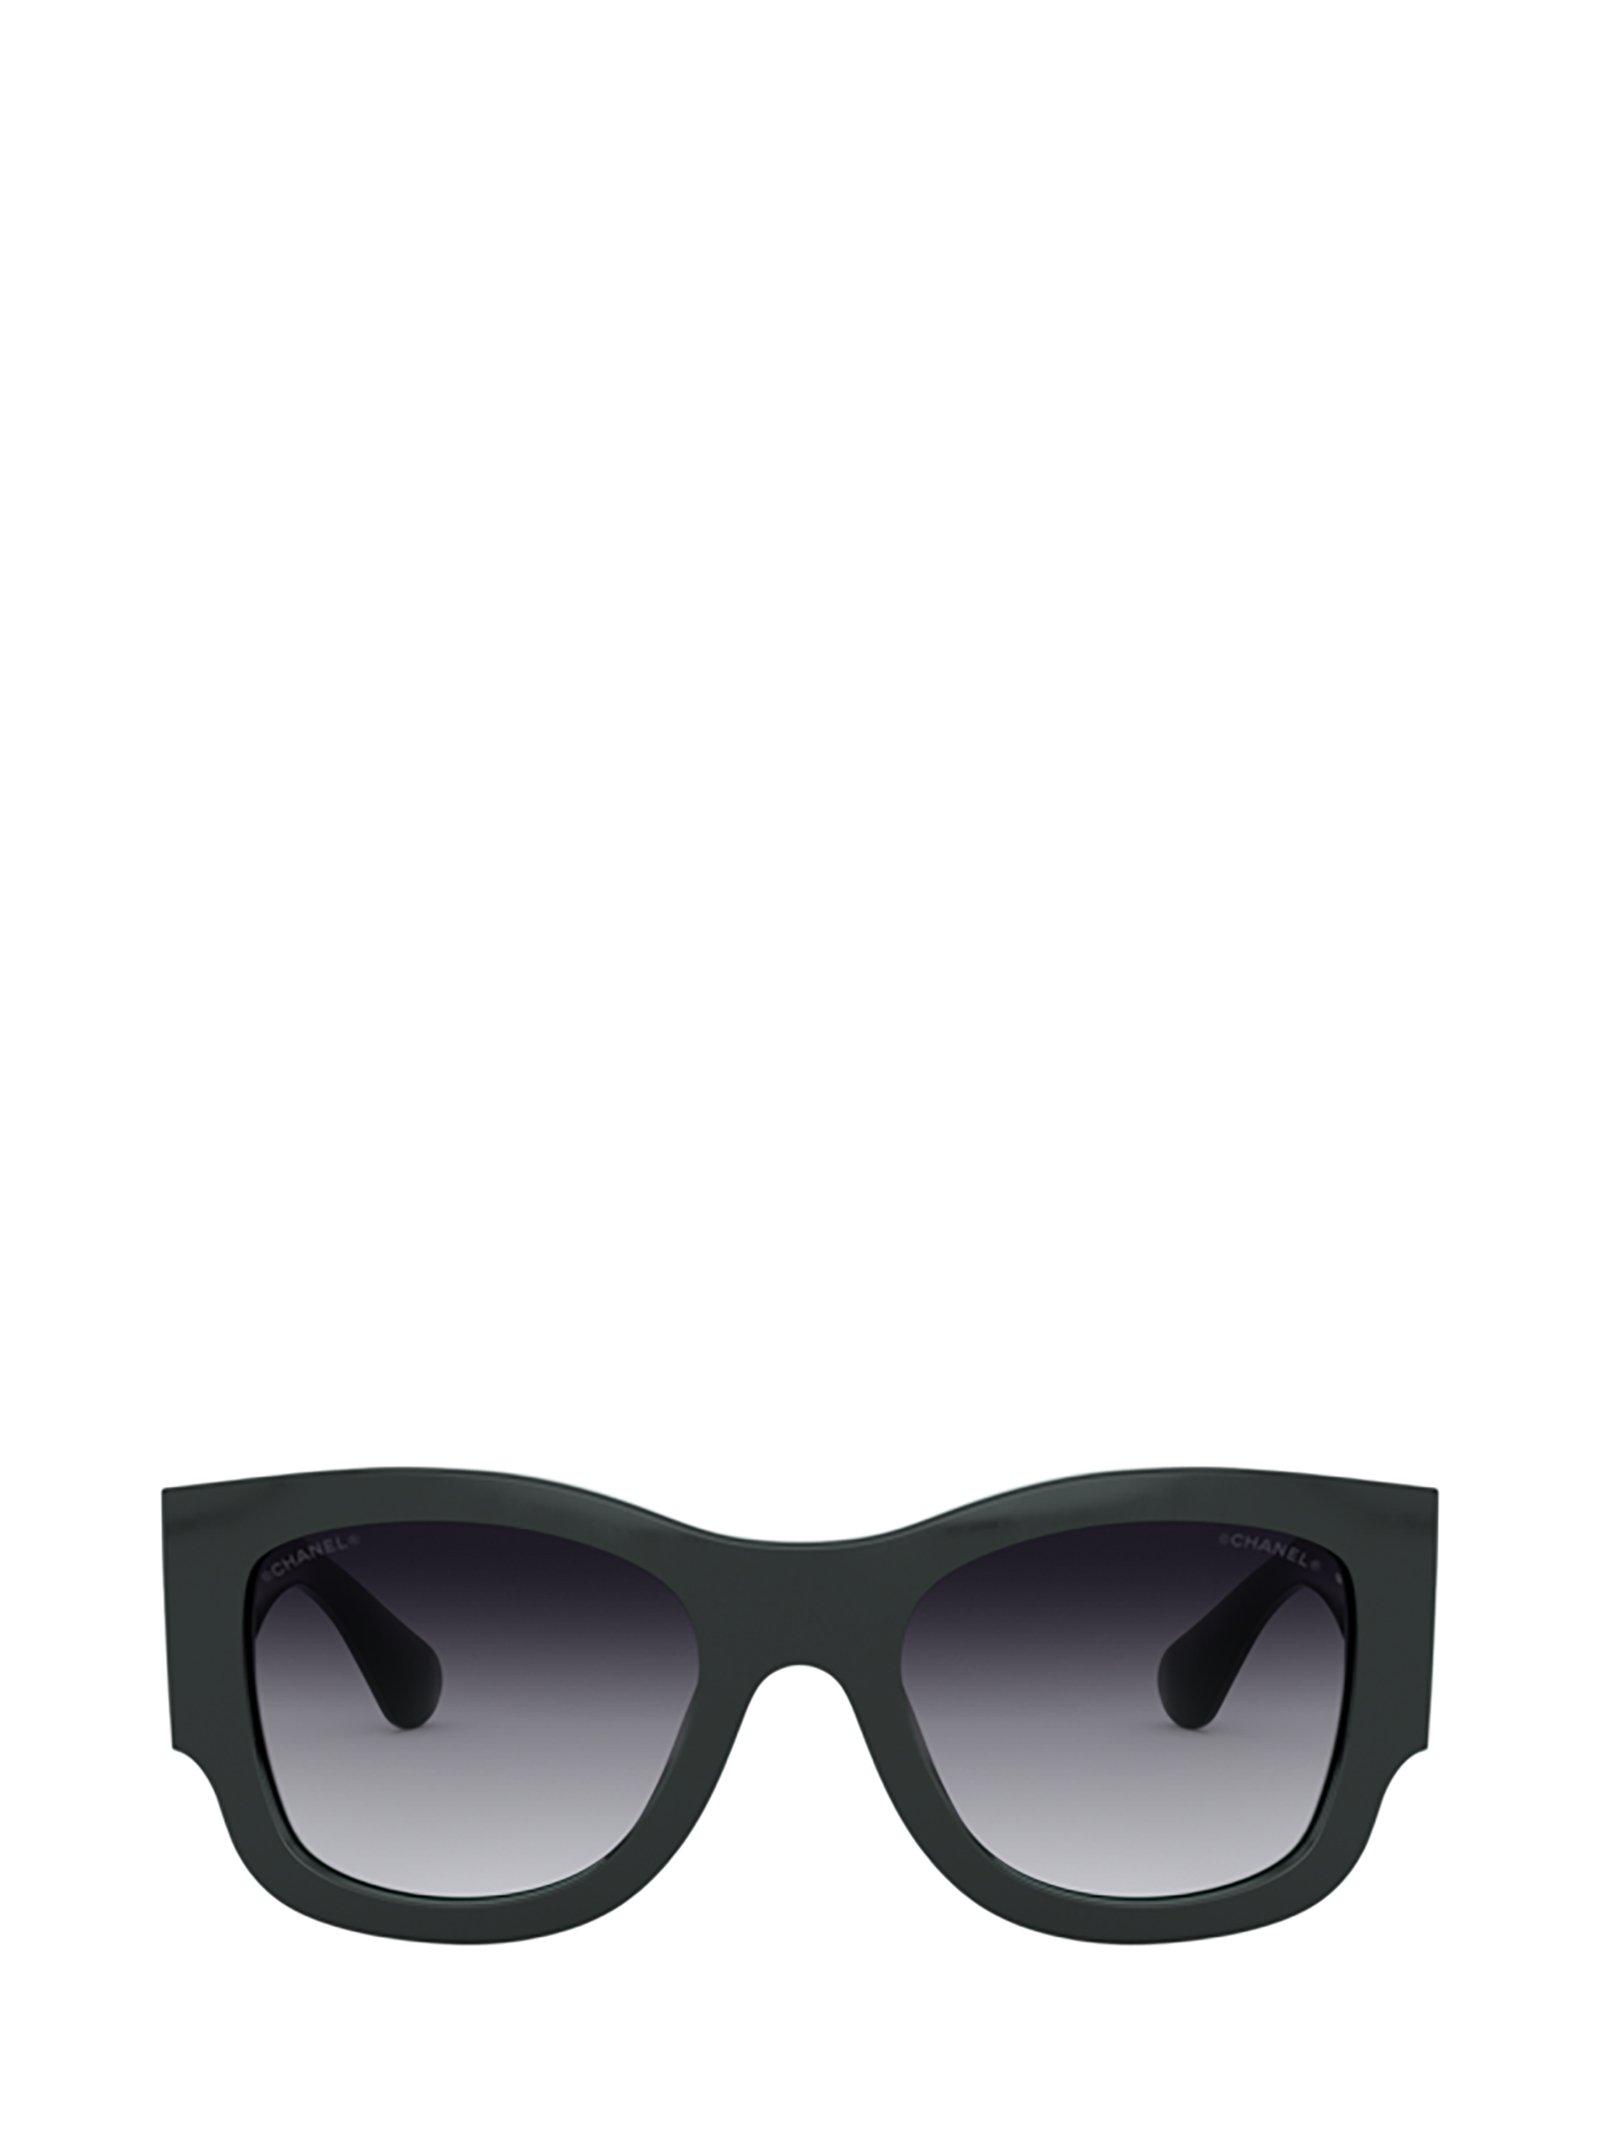 Chanel Square Frame Sunglasses in Green - Lyst